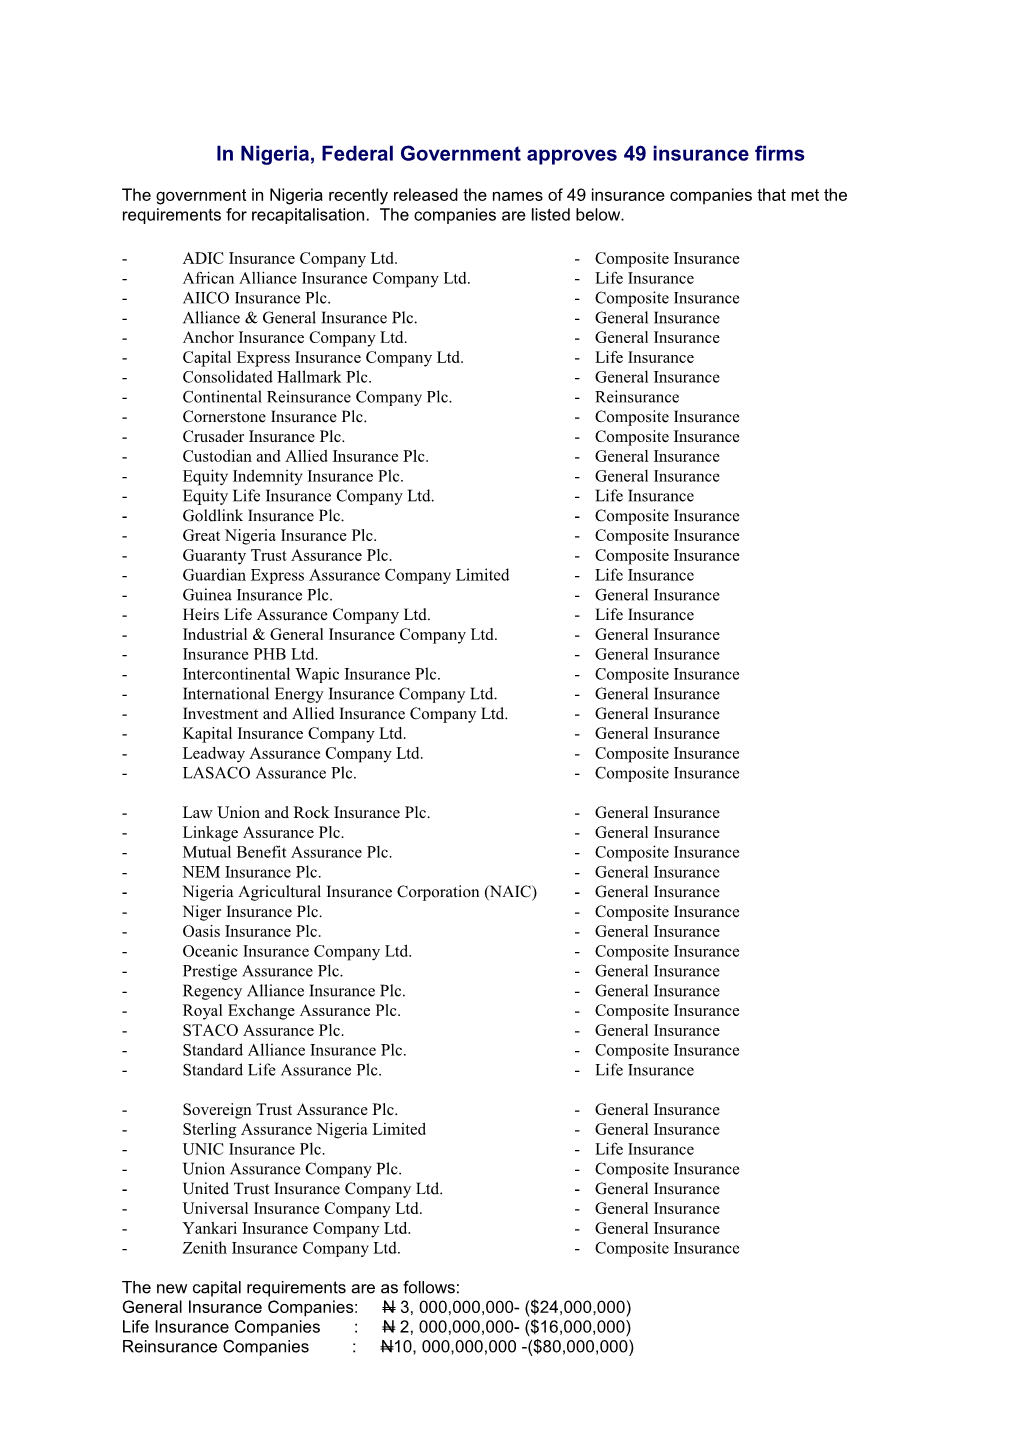 The Names of the 49 Insurance Companies That Were Successful in the Verification And